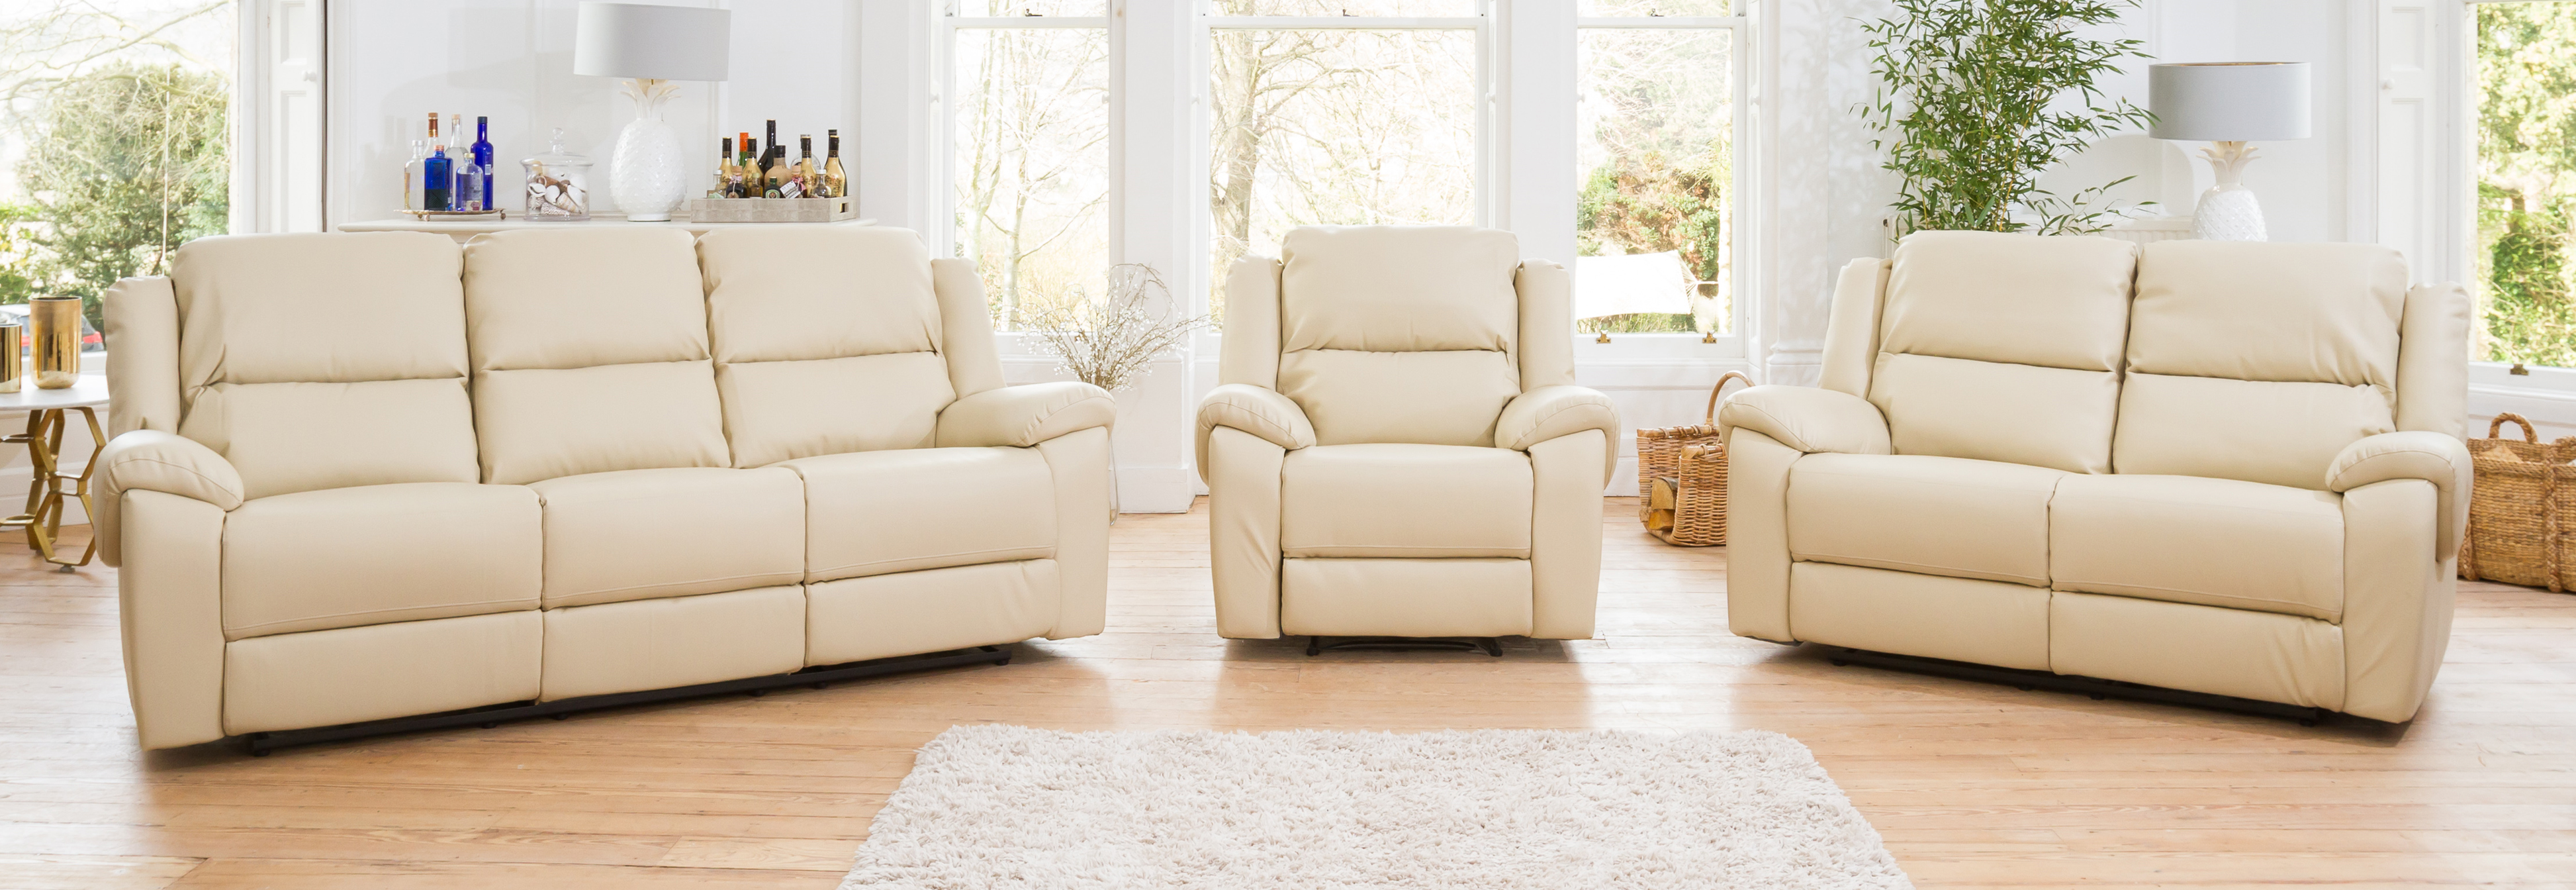 Warwick Electric Reclining Suite Cream, Warwick Leather Power Lift Recliner Chair